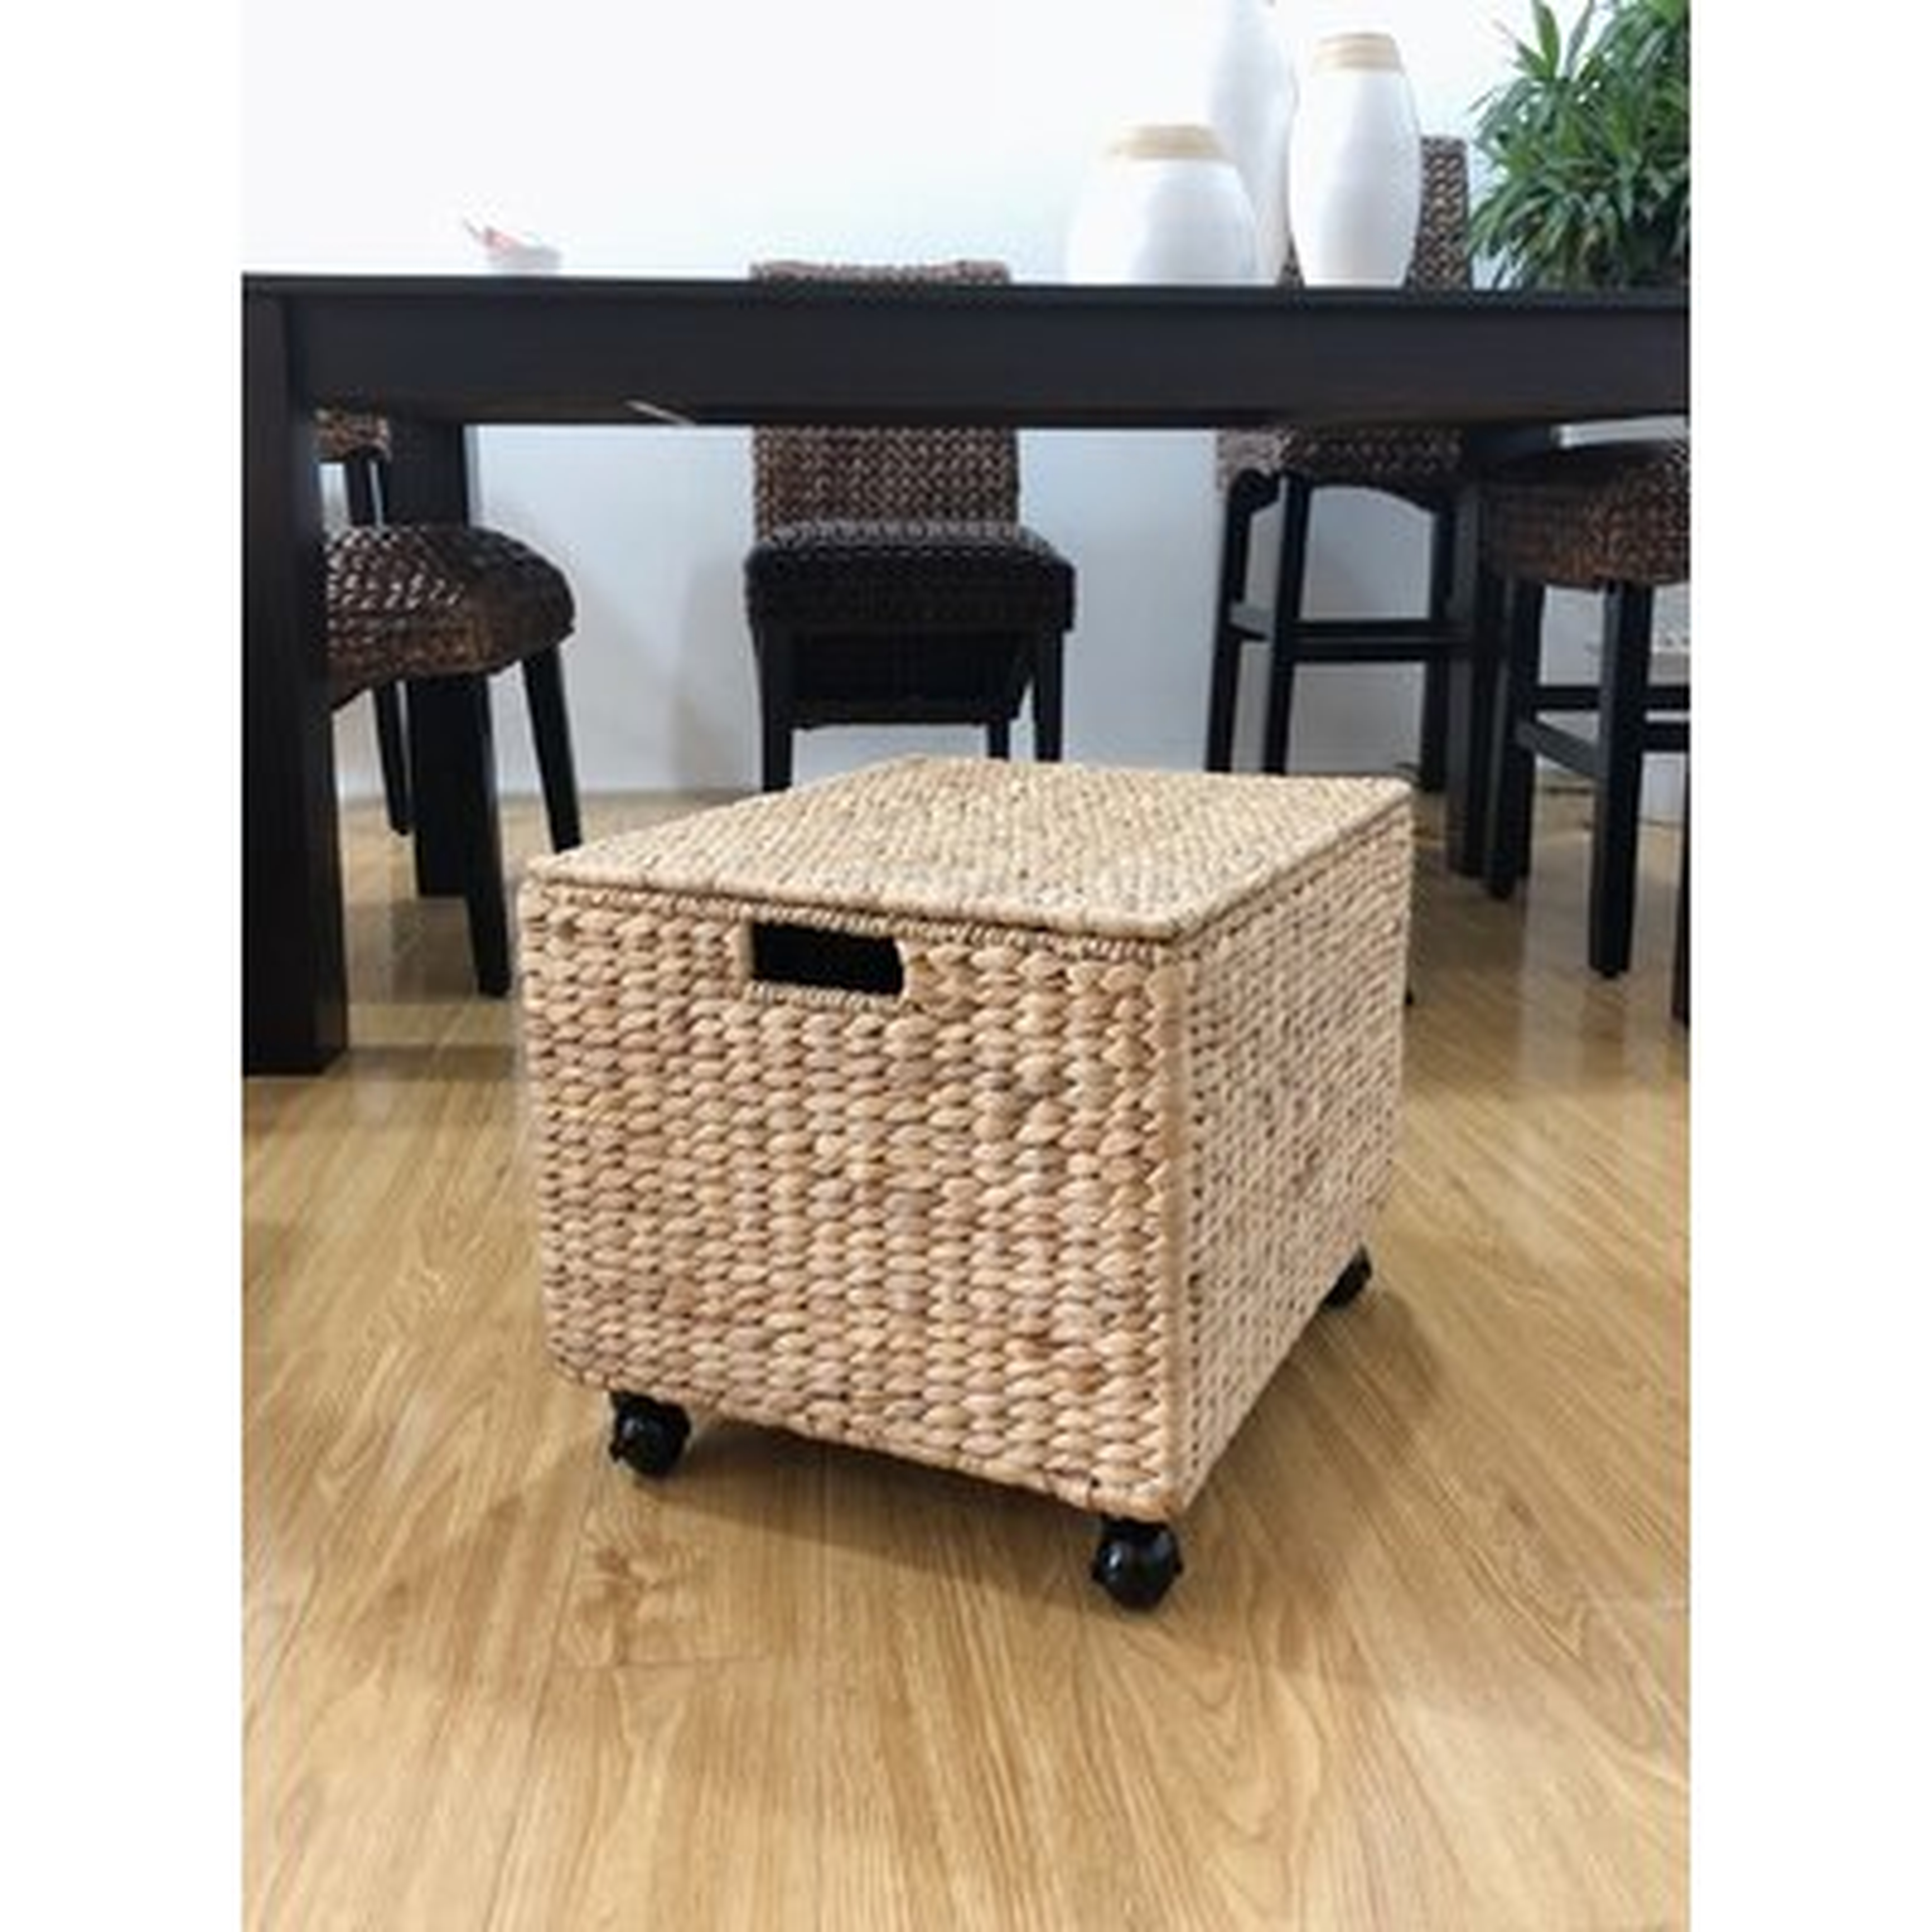 Rolling Seagrass Filing Cabinet - Wayfair